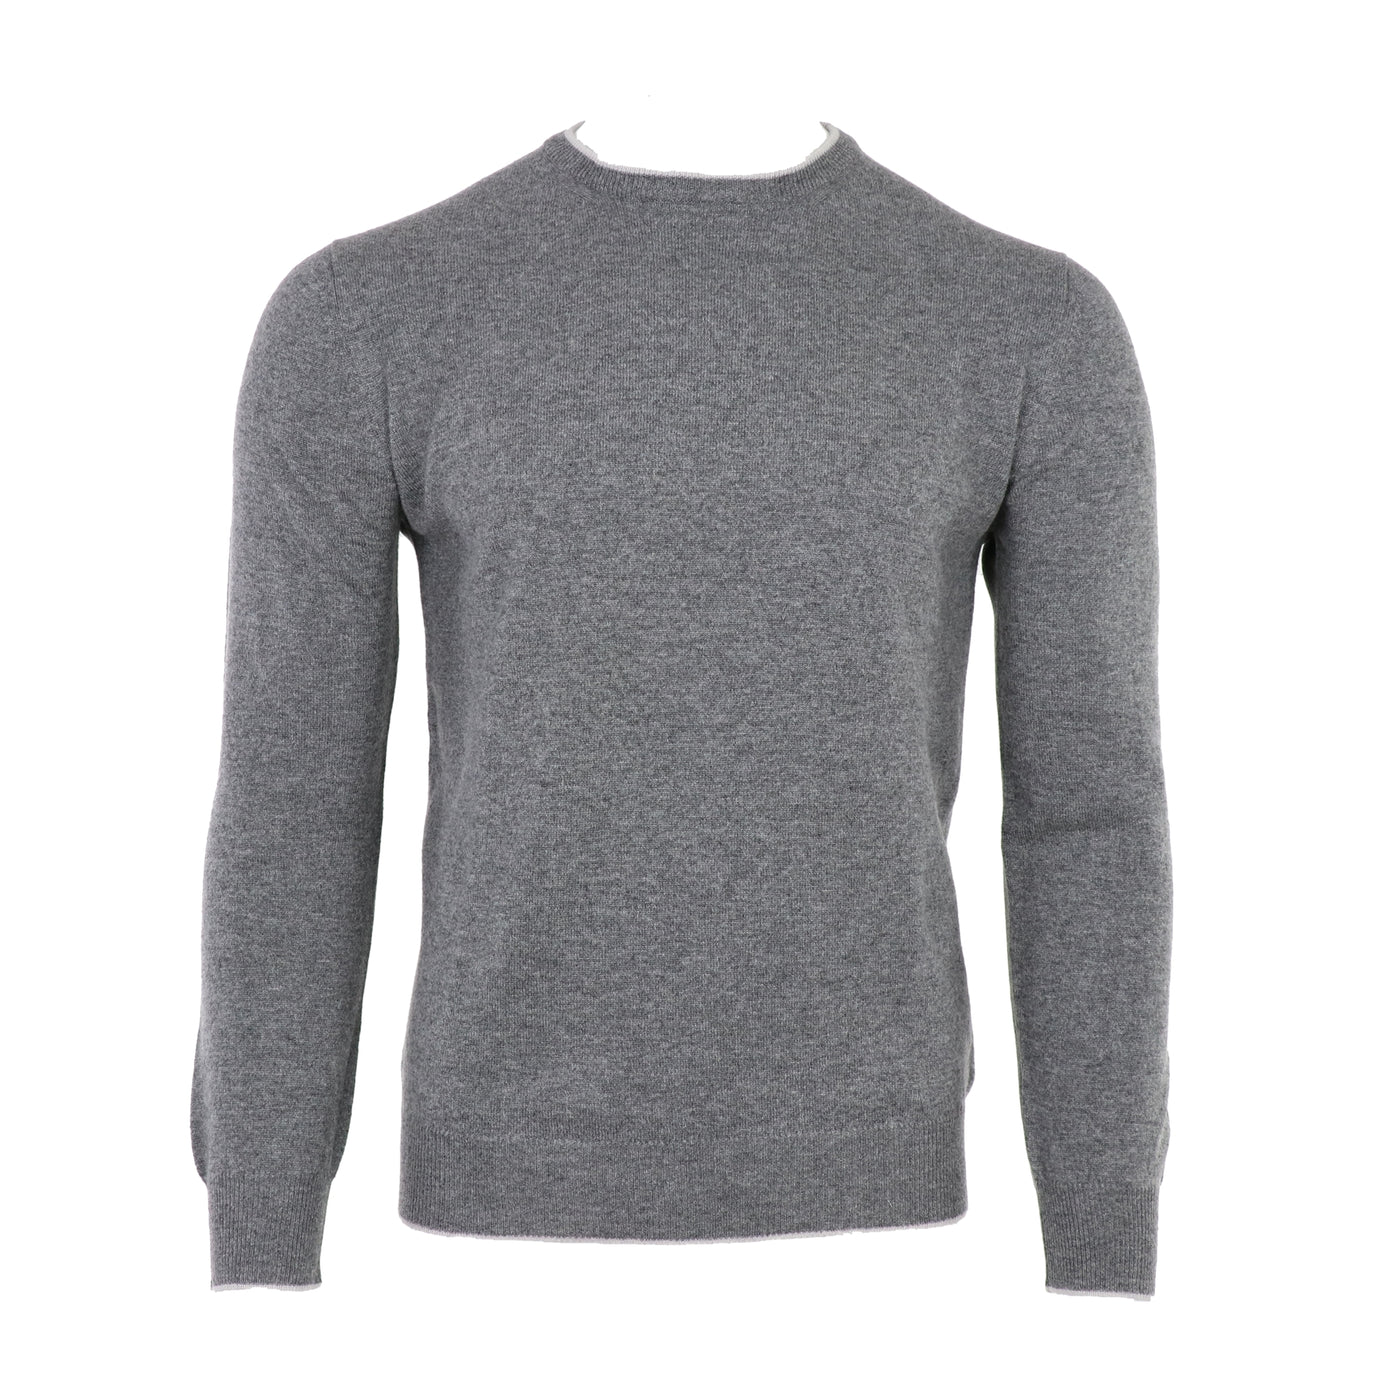 The Pashmere Cashmere Crewneck in Pearl Grey